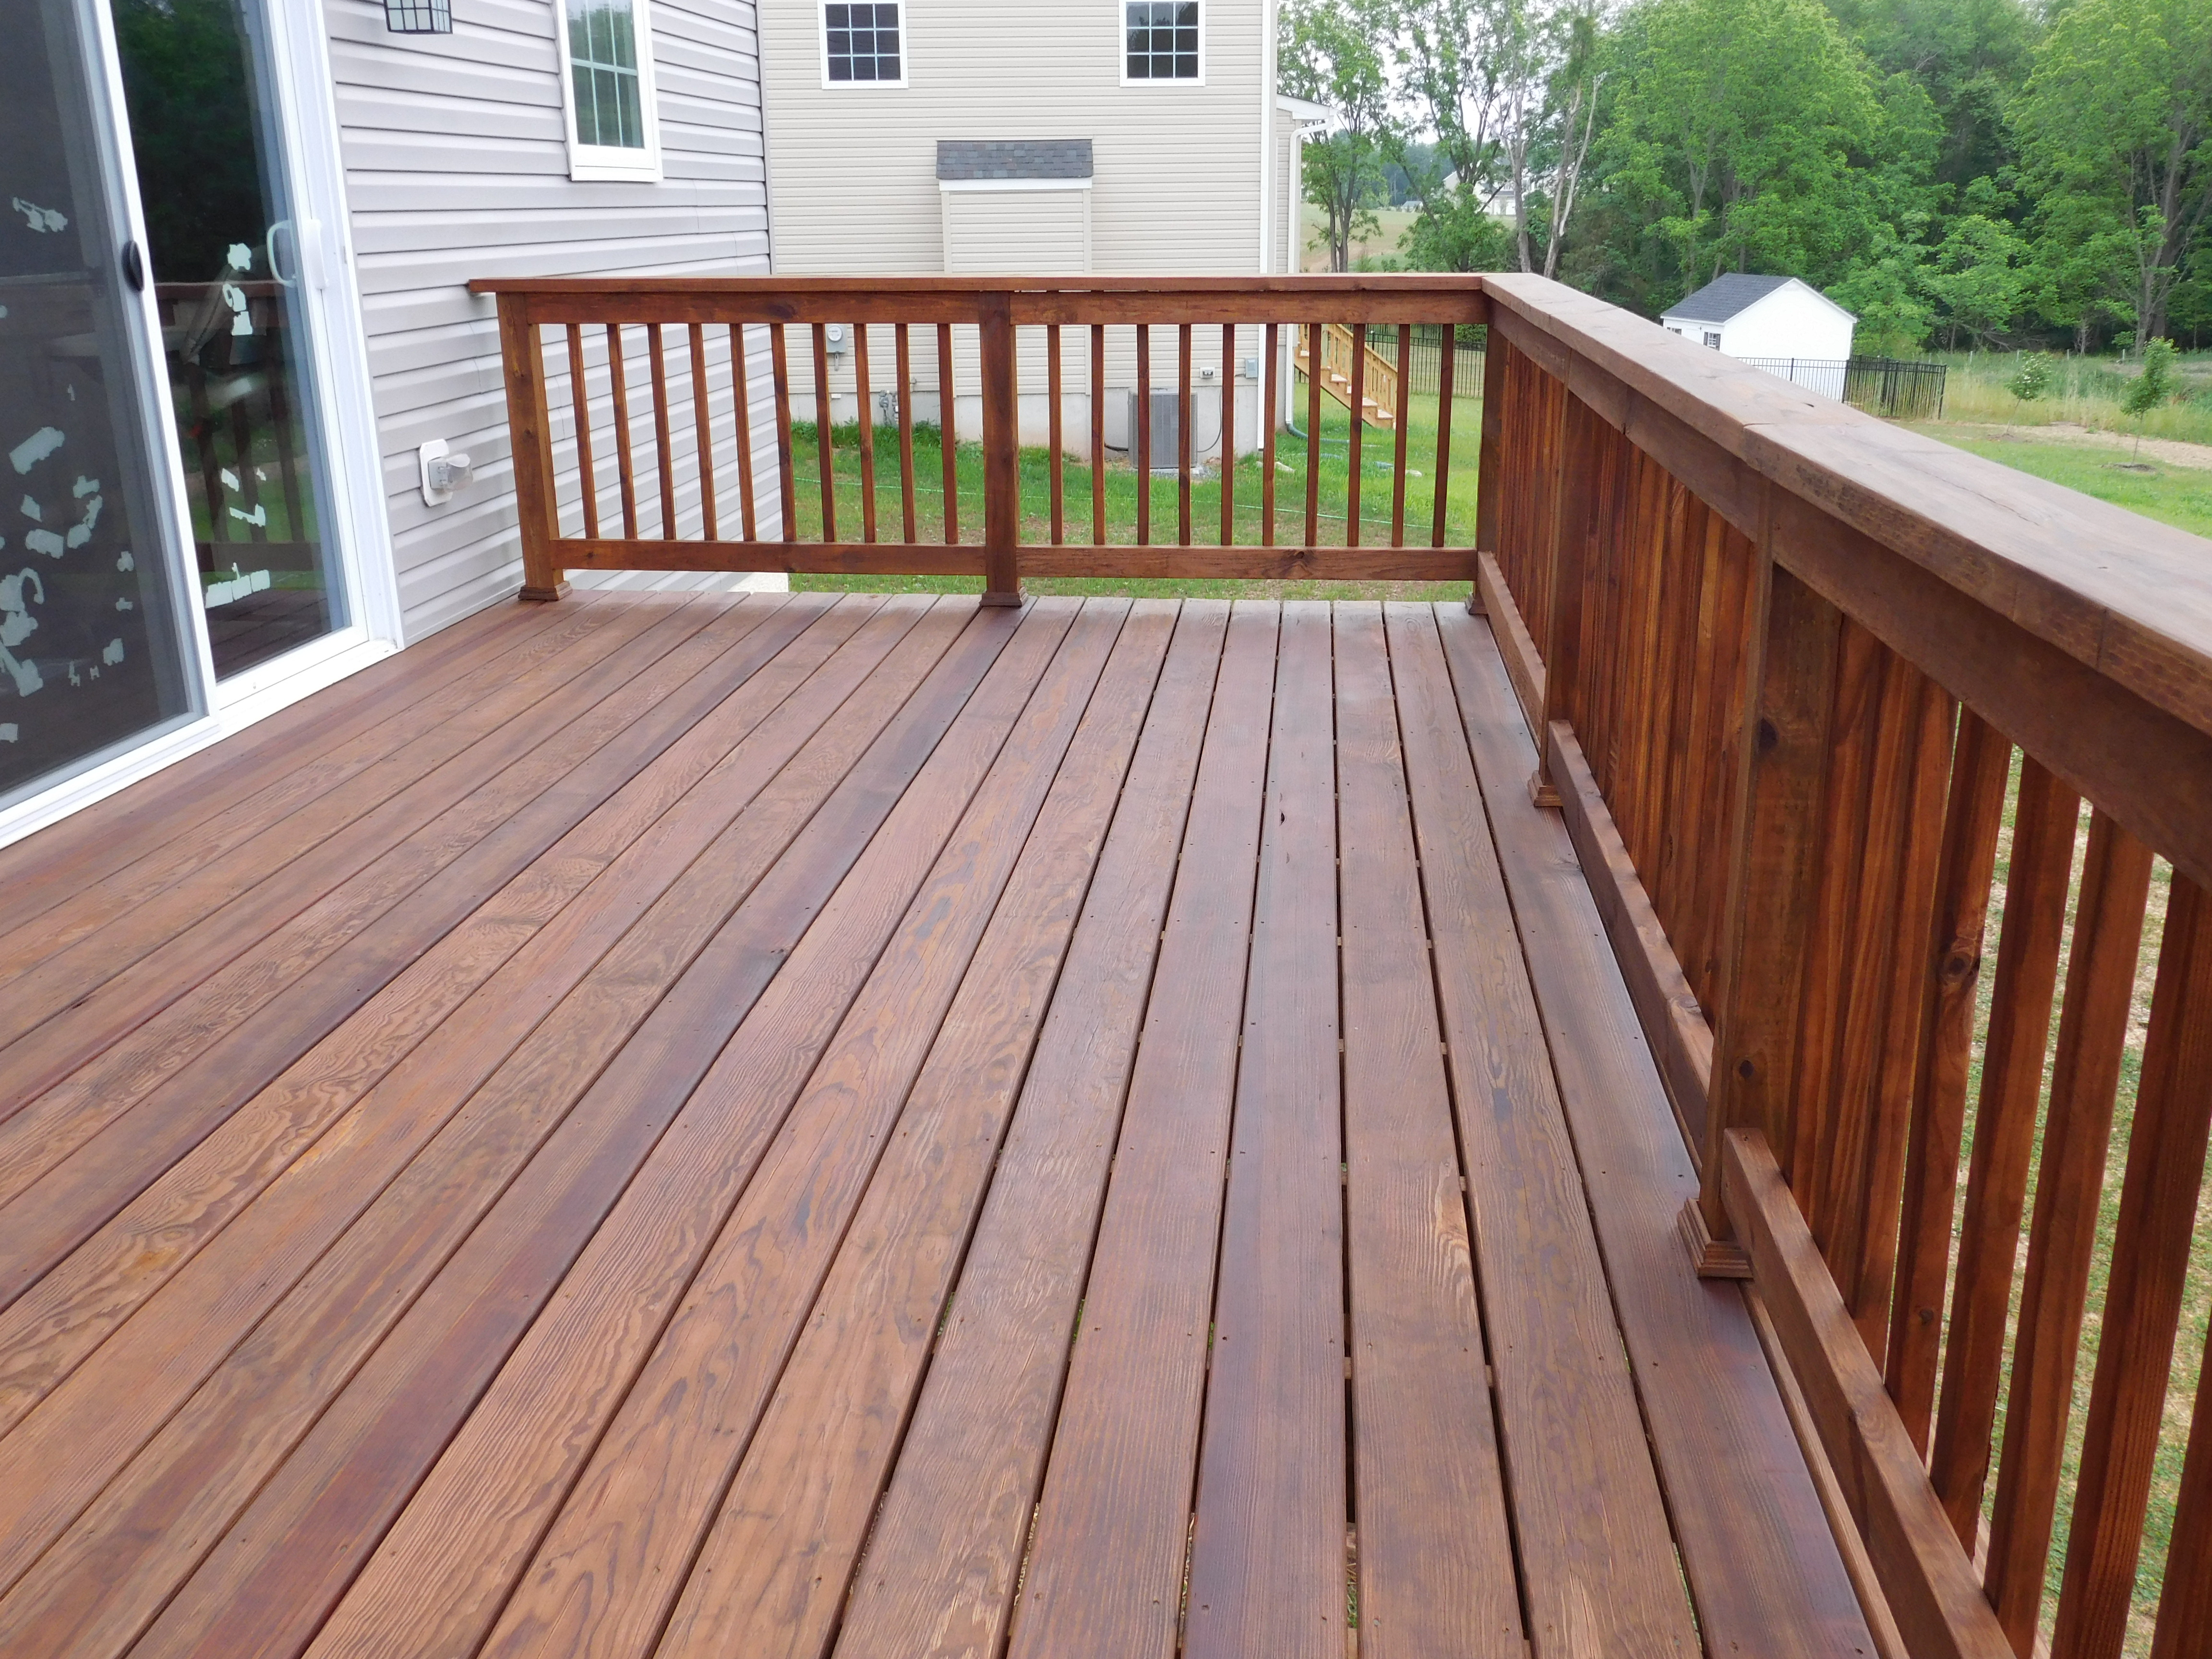 Douglas Fir Decking Uk Boards Prices Deck Stain Composite Railing with dimensions 4608 X 3456